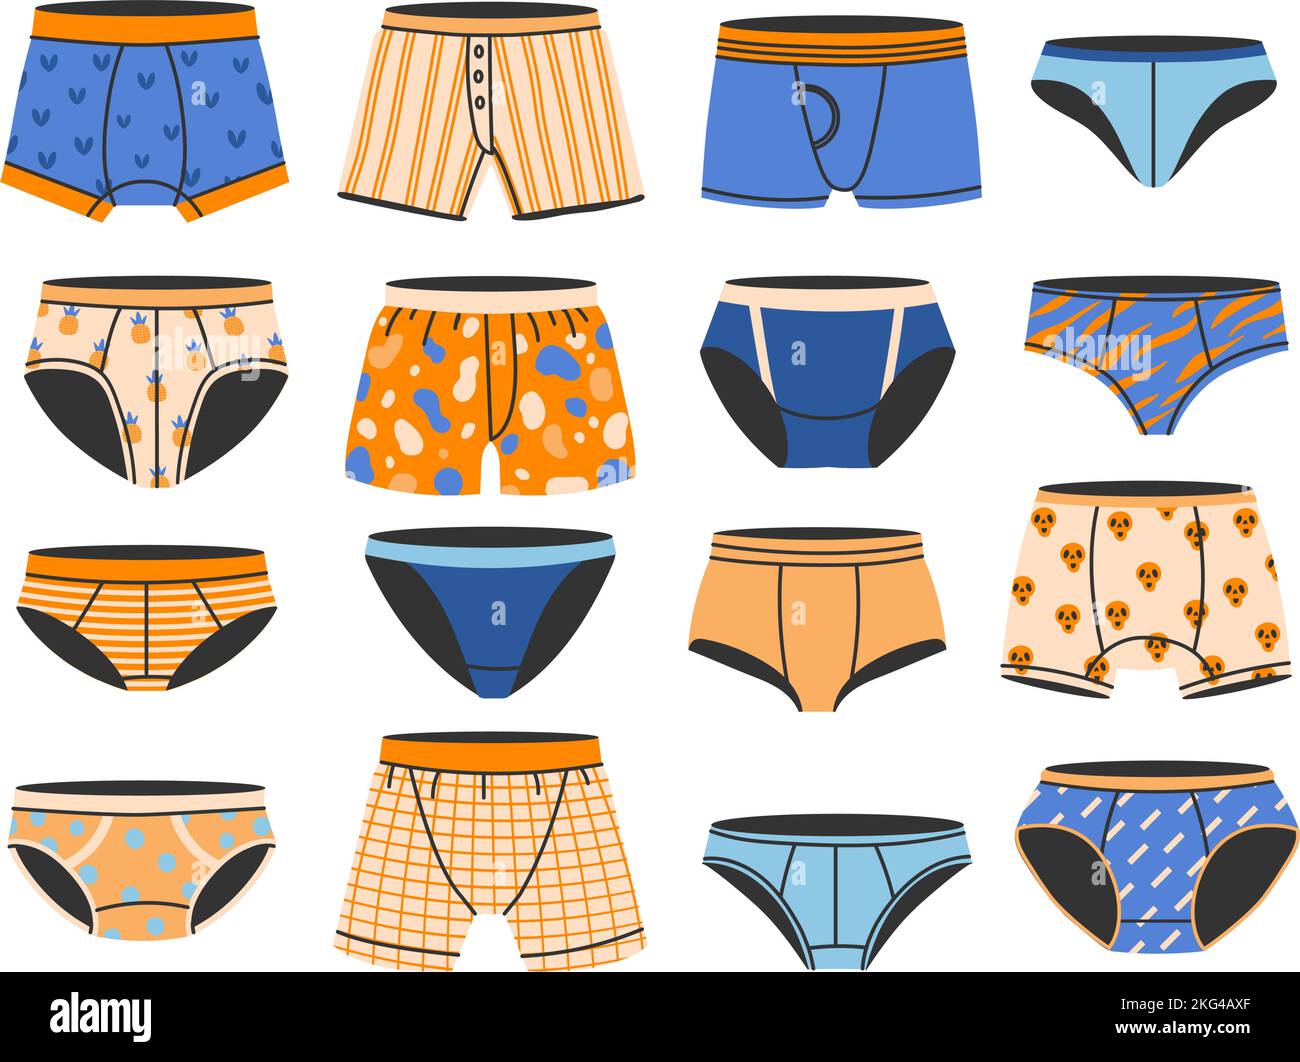 Casual man panties. Boy swimwear trunks, mens underwear and male everyday boxers. Briefs types vector set Stock Vector